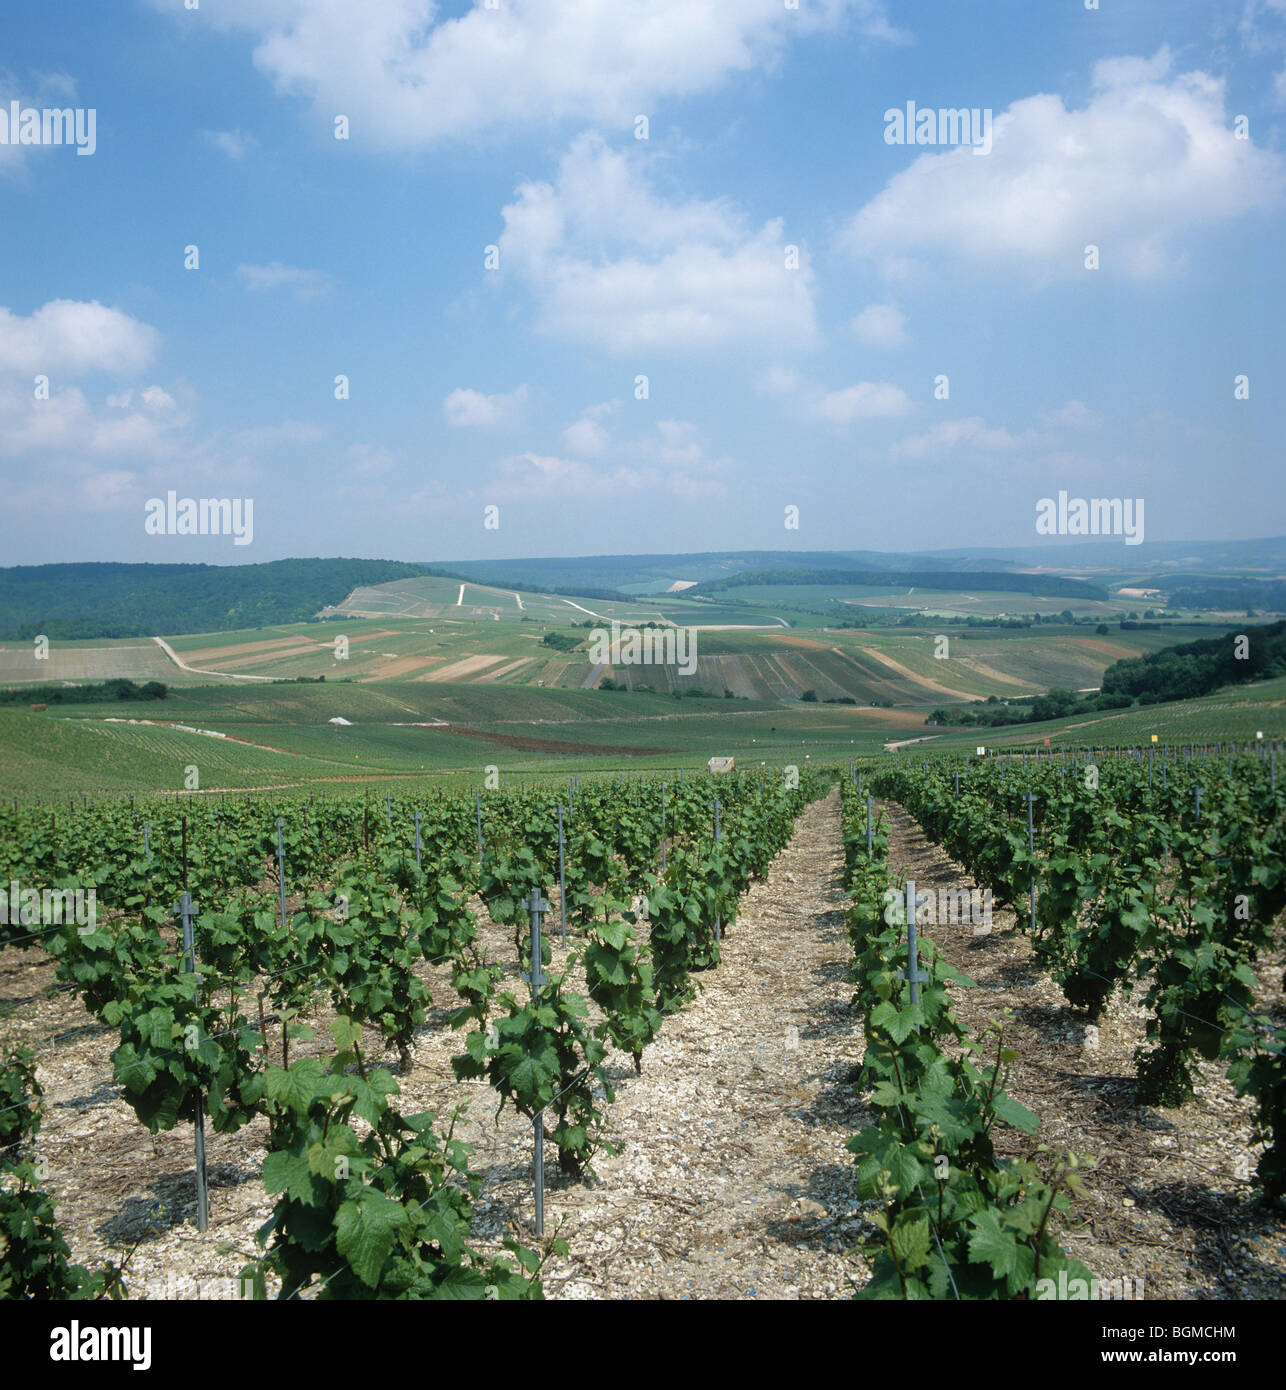 Far reaching view of vineyards in flower bud in the Champagne, France Stock Photo